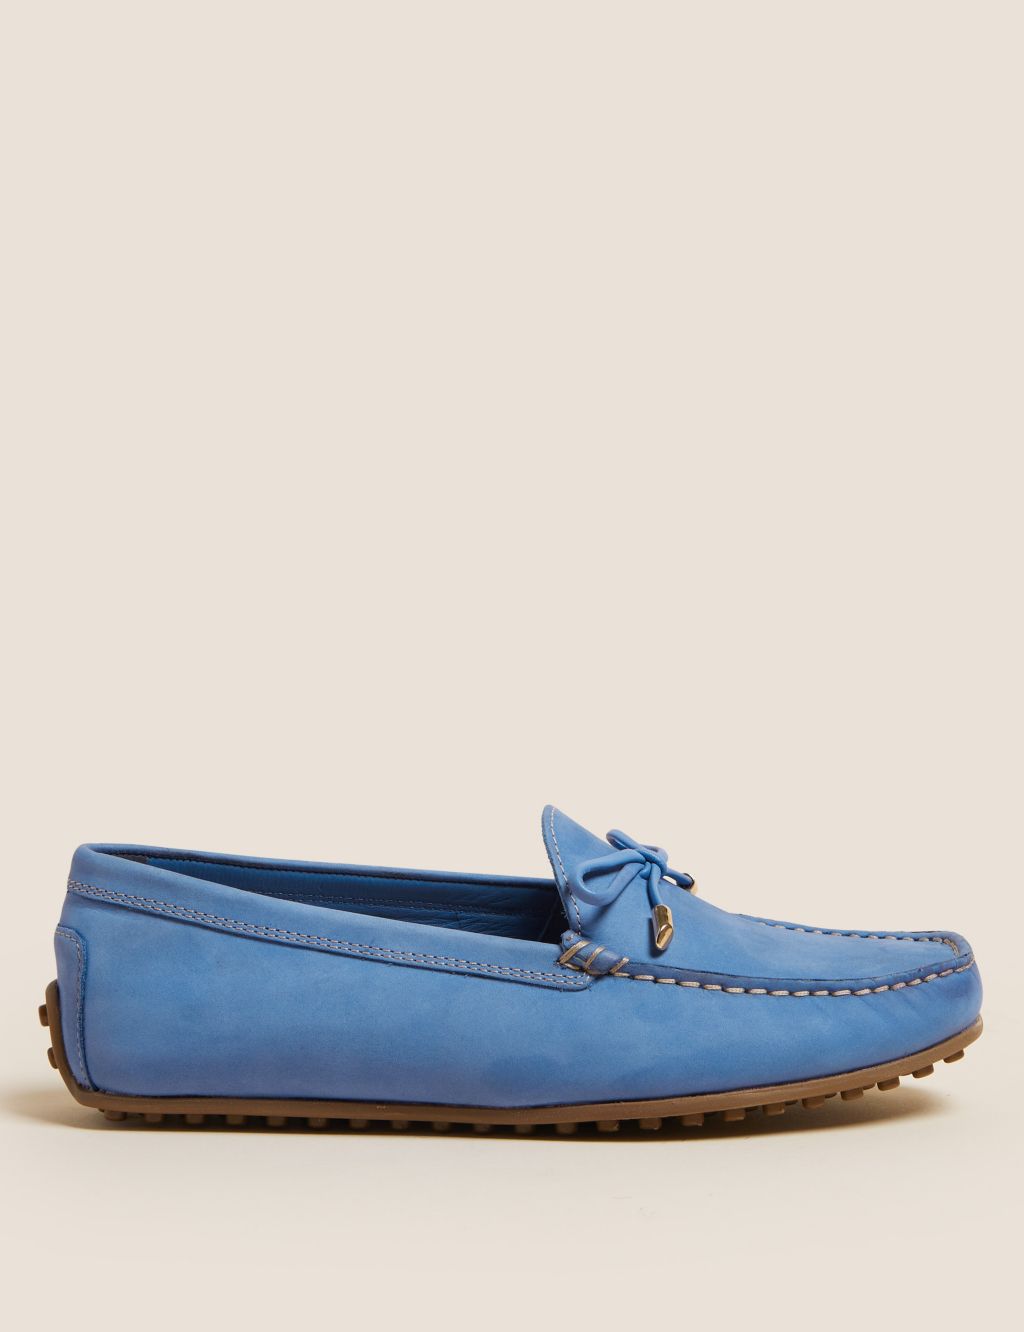 Wide Fit Leather Bow Boat Shoes image 1